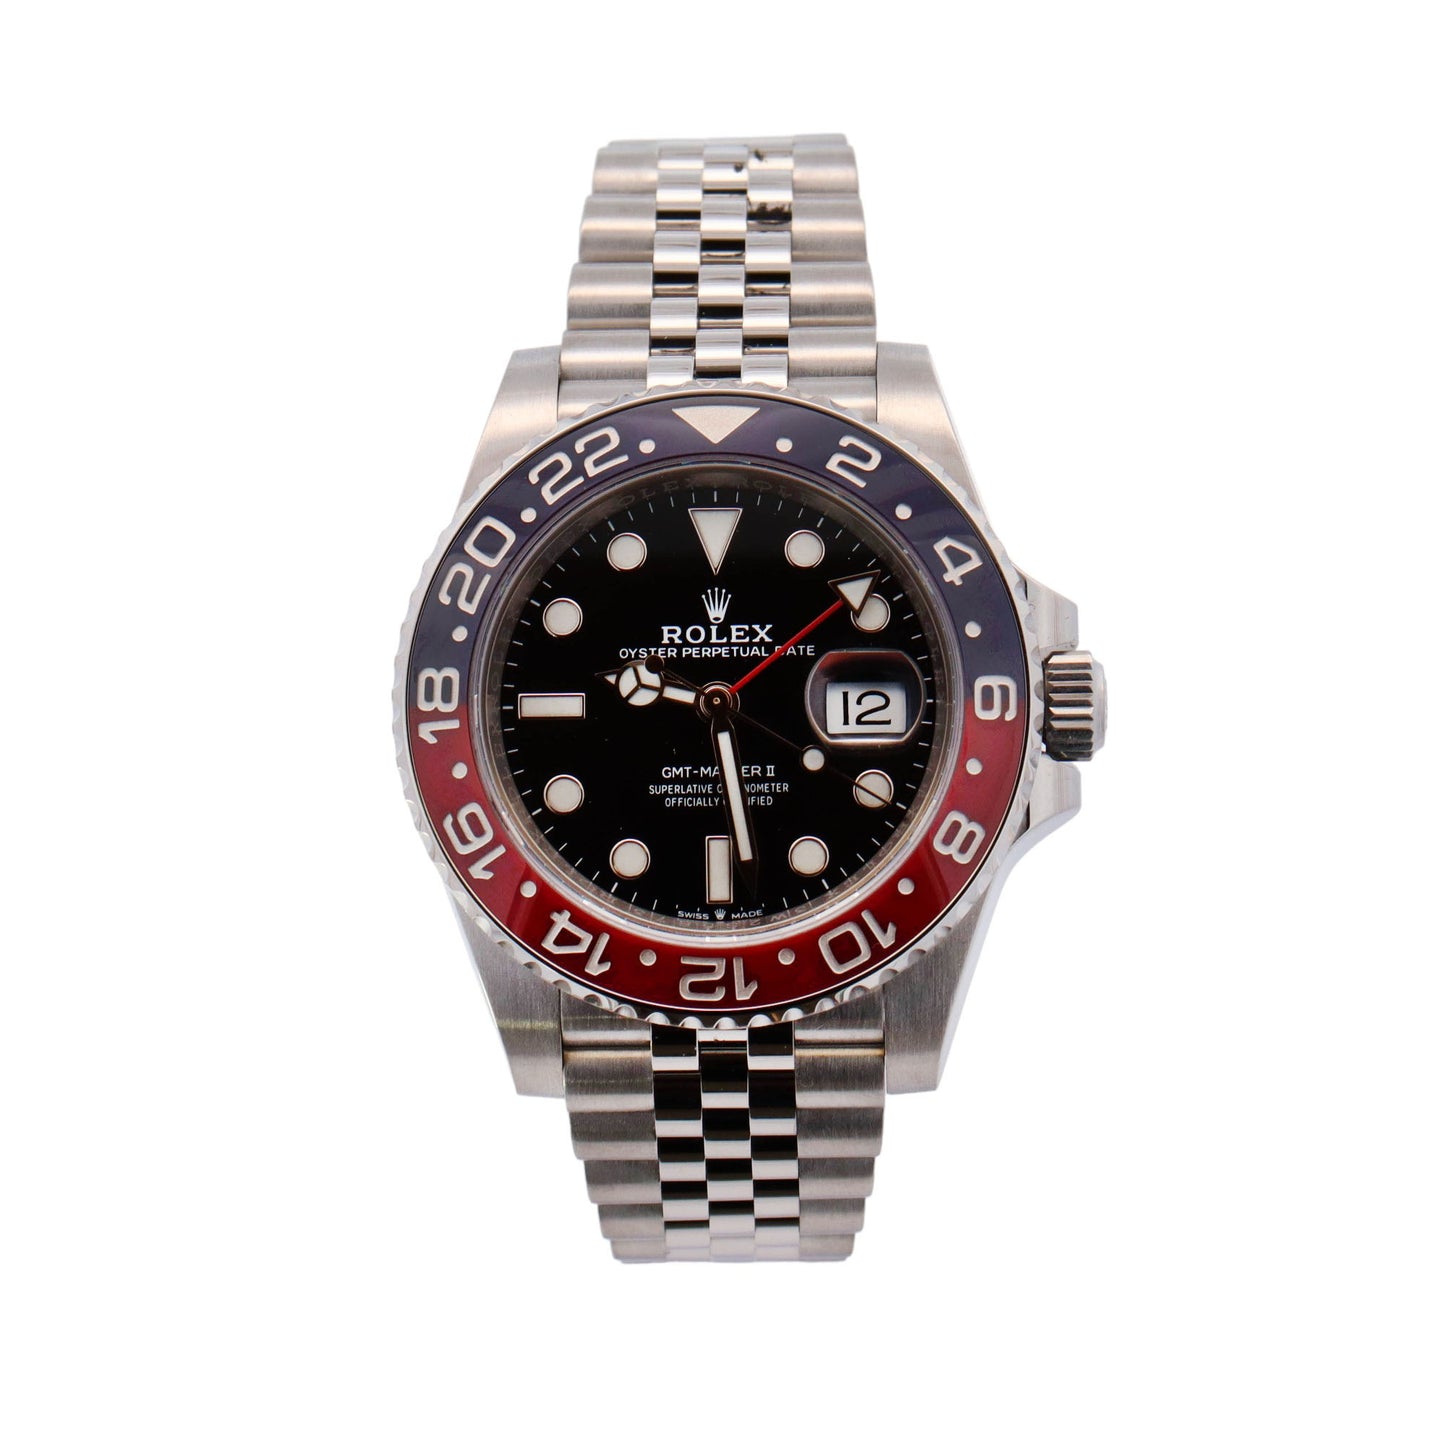 Rolex GMT-Master II "Pepsi" Stainless Steel 40mm Black Dot Dial Watch Reference# 126710BLRO